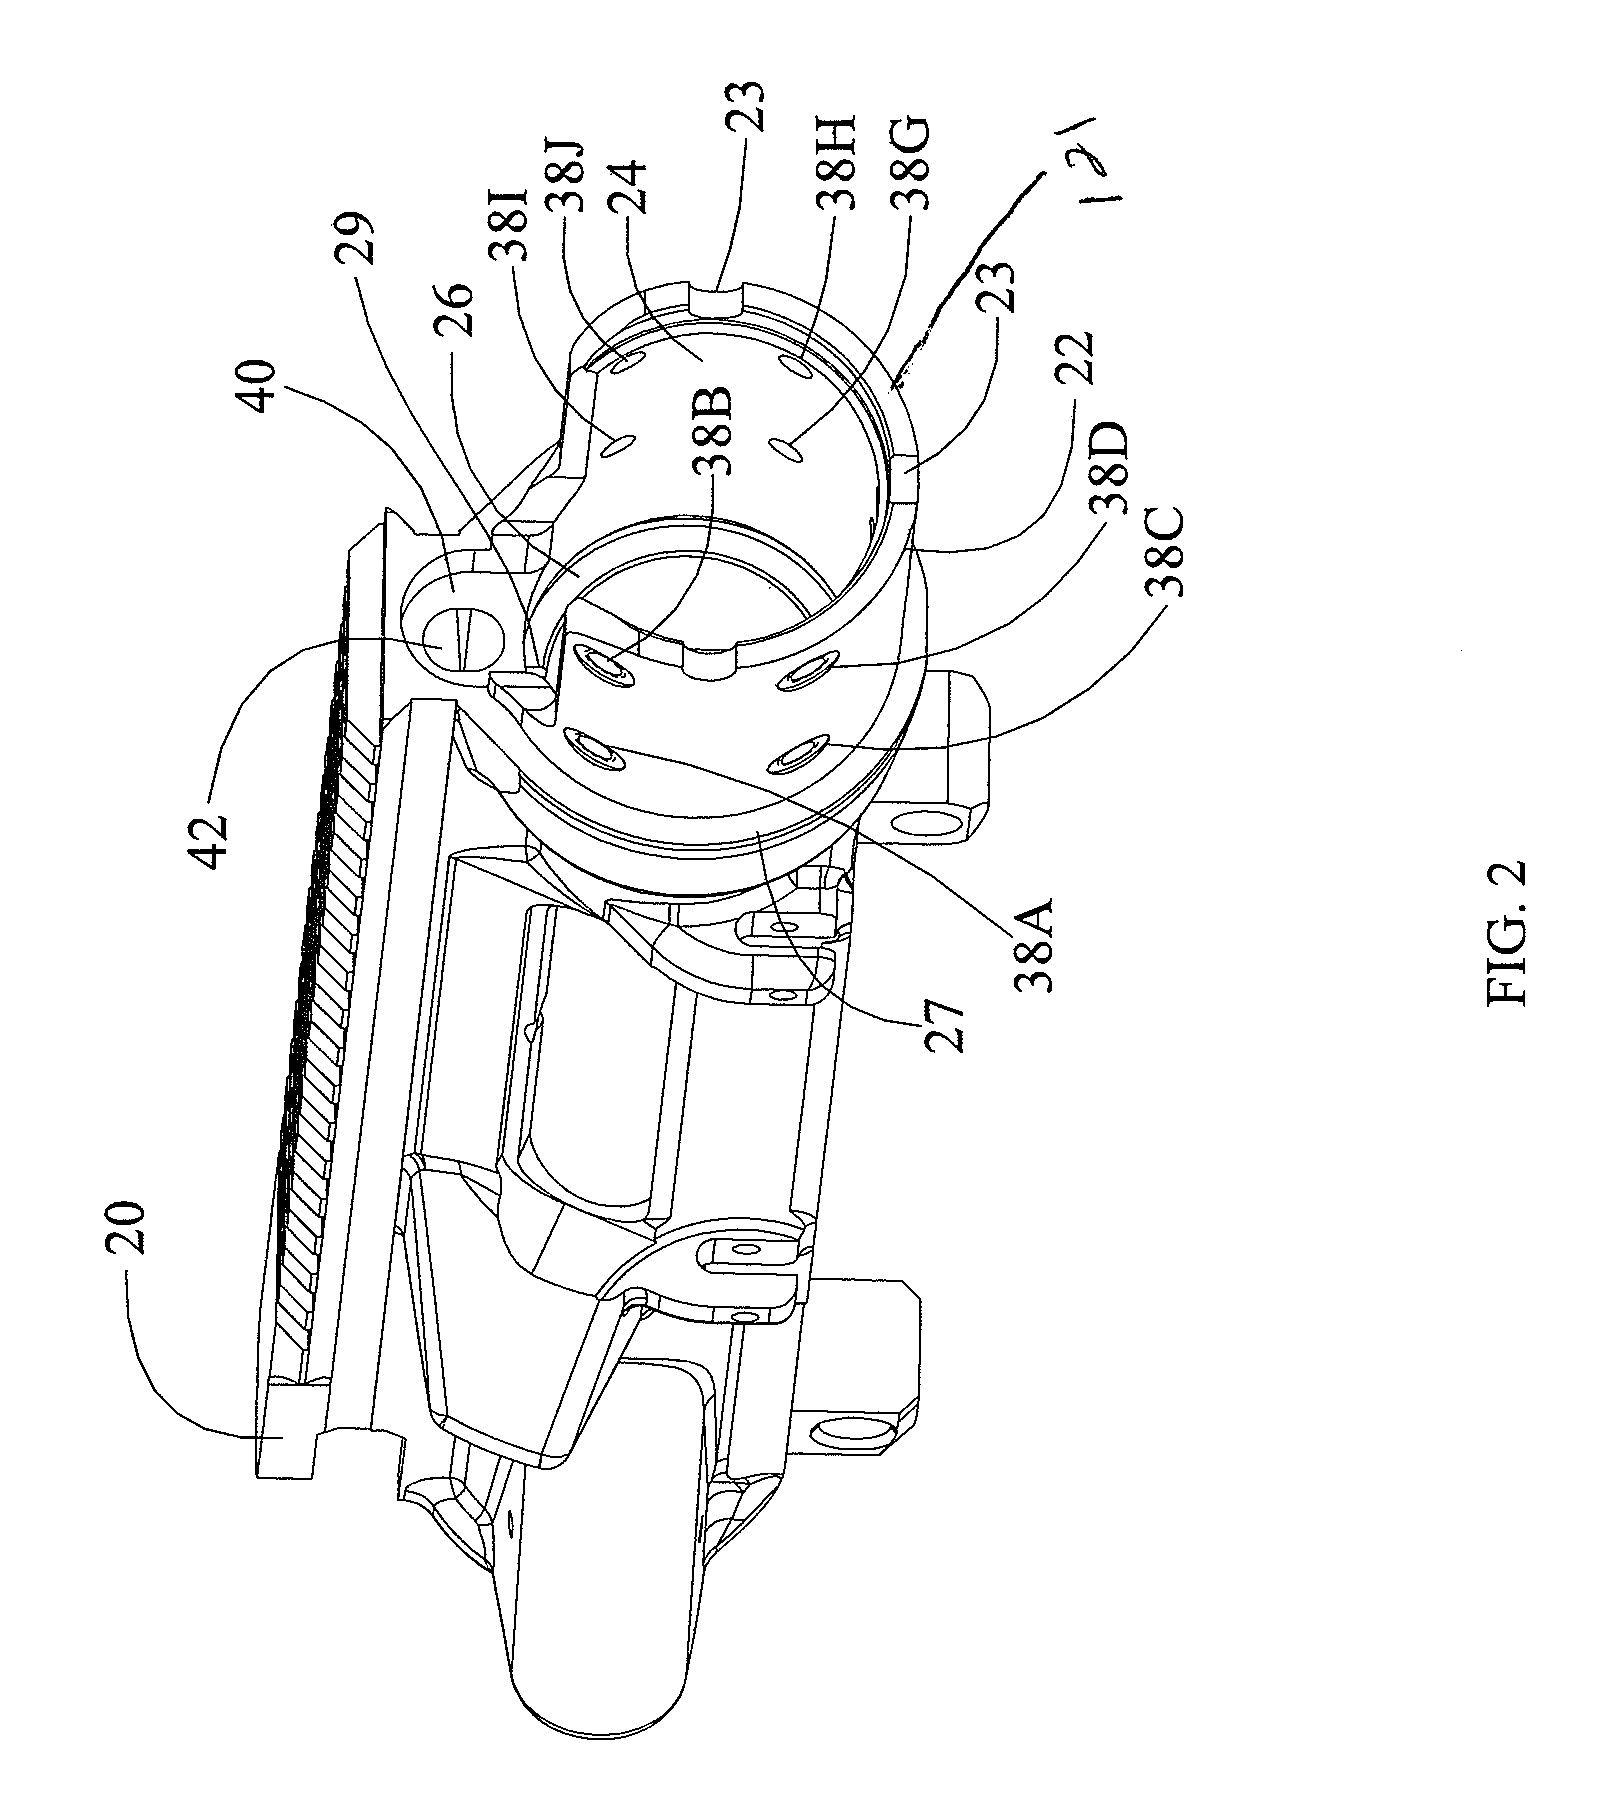 Firearm receiver assembly